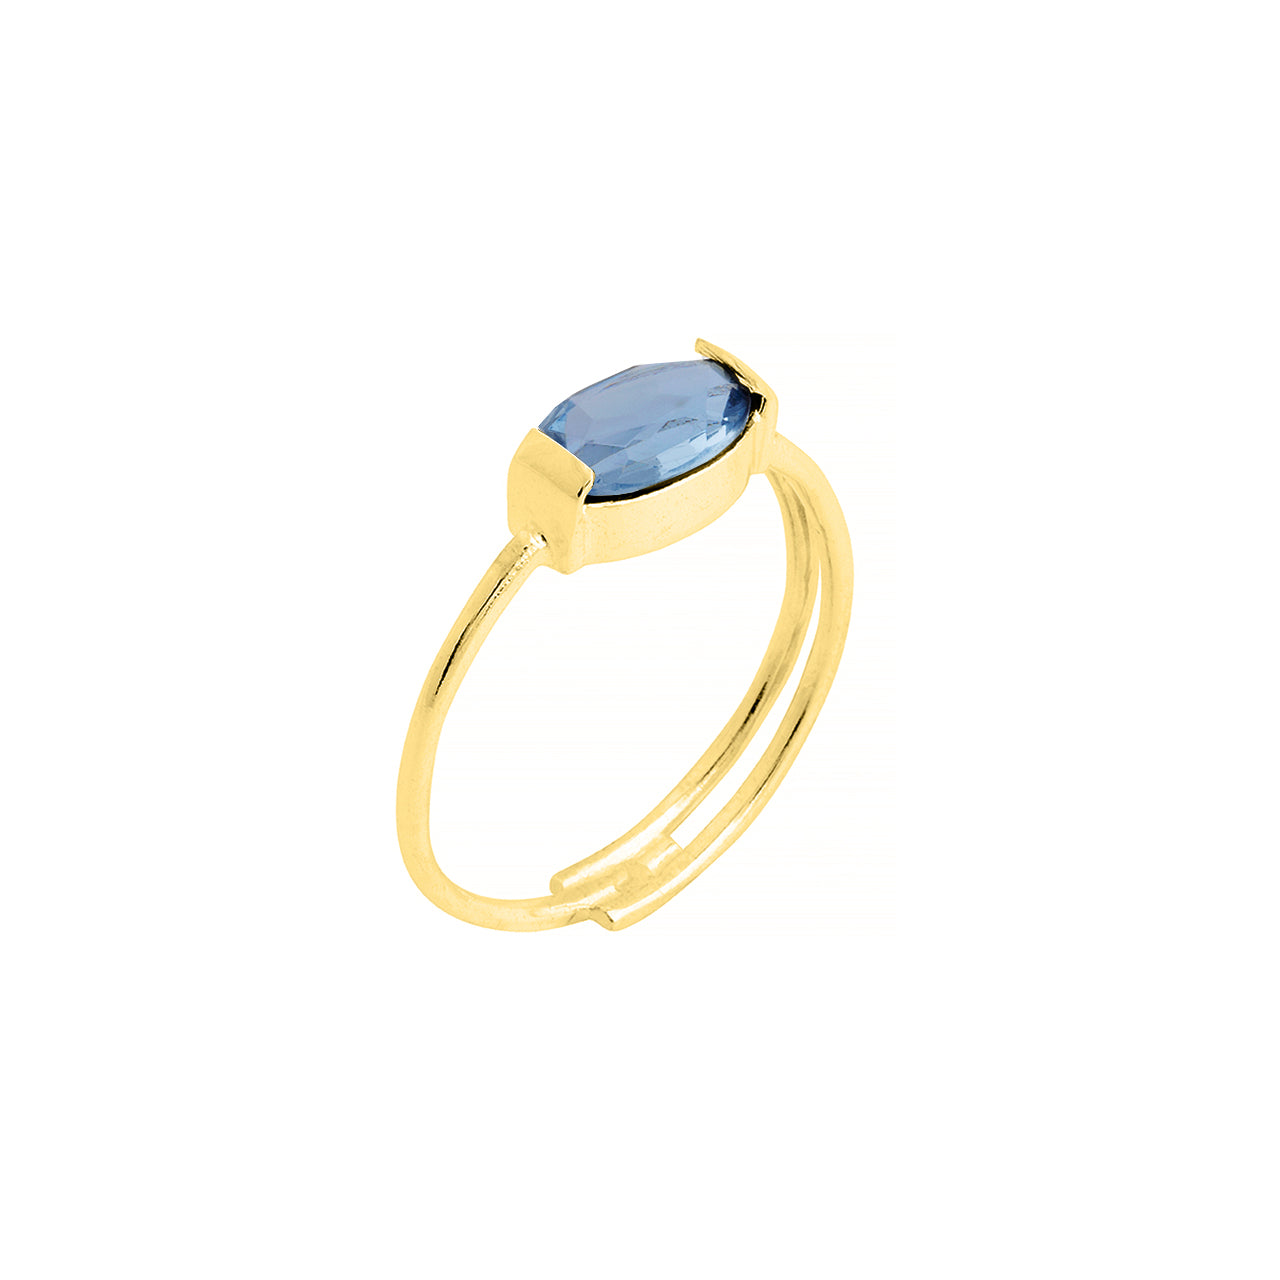 goldplated colon ring with vintage blue stone